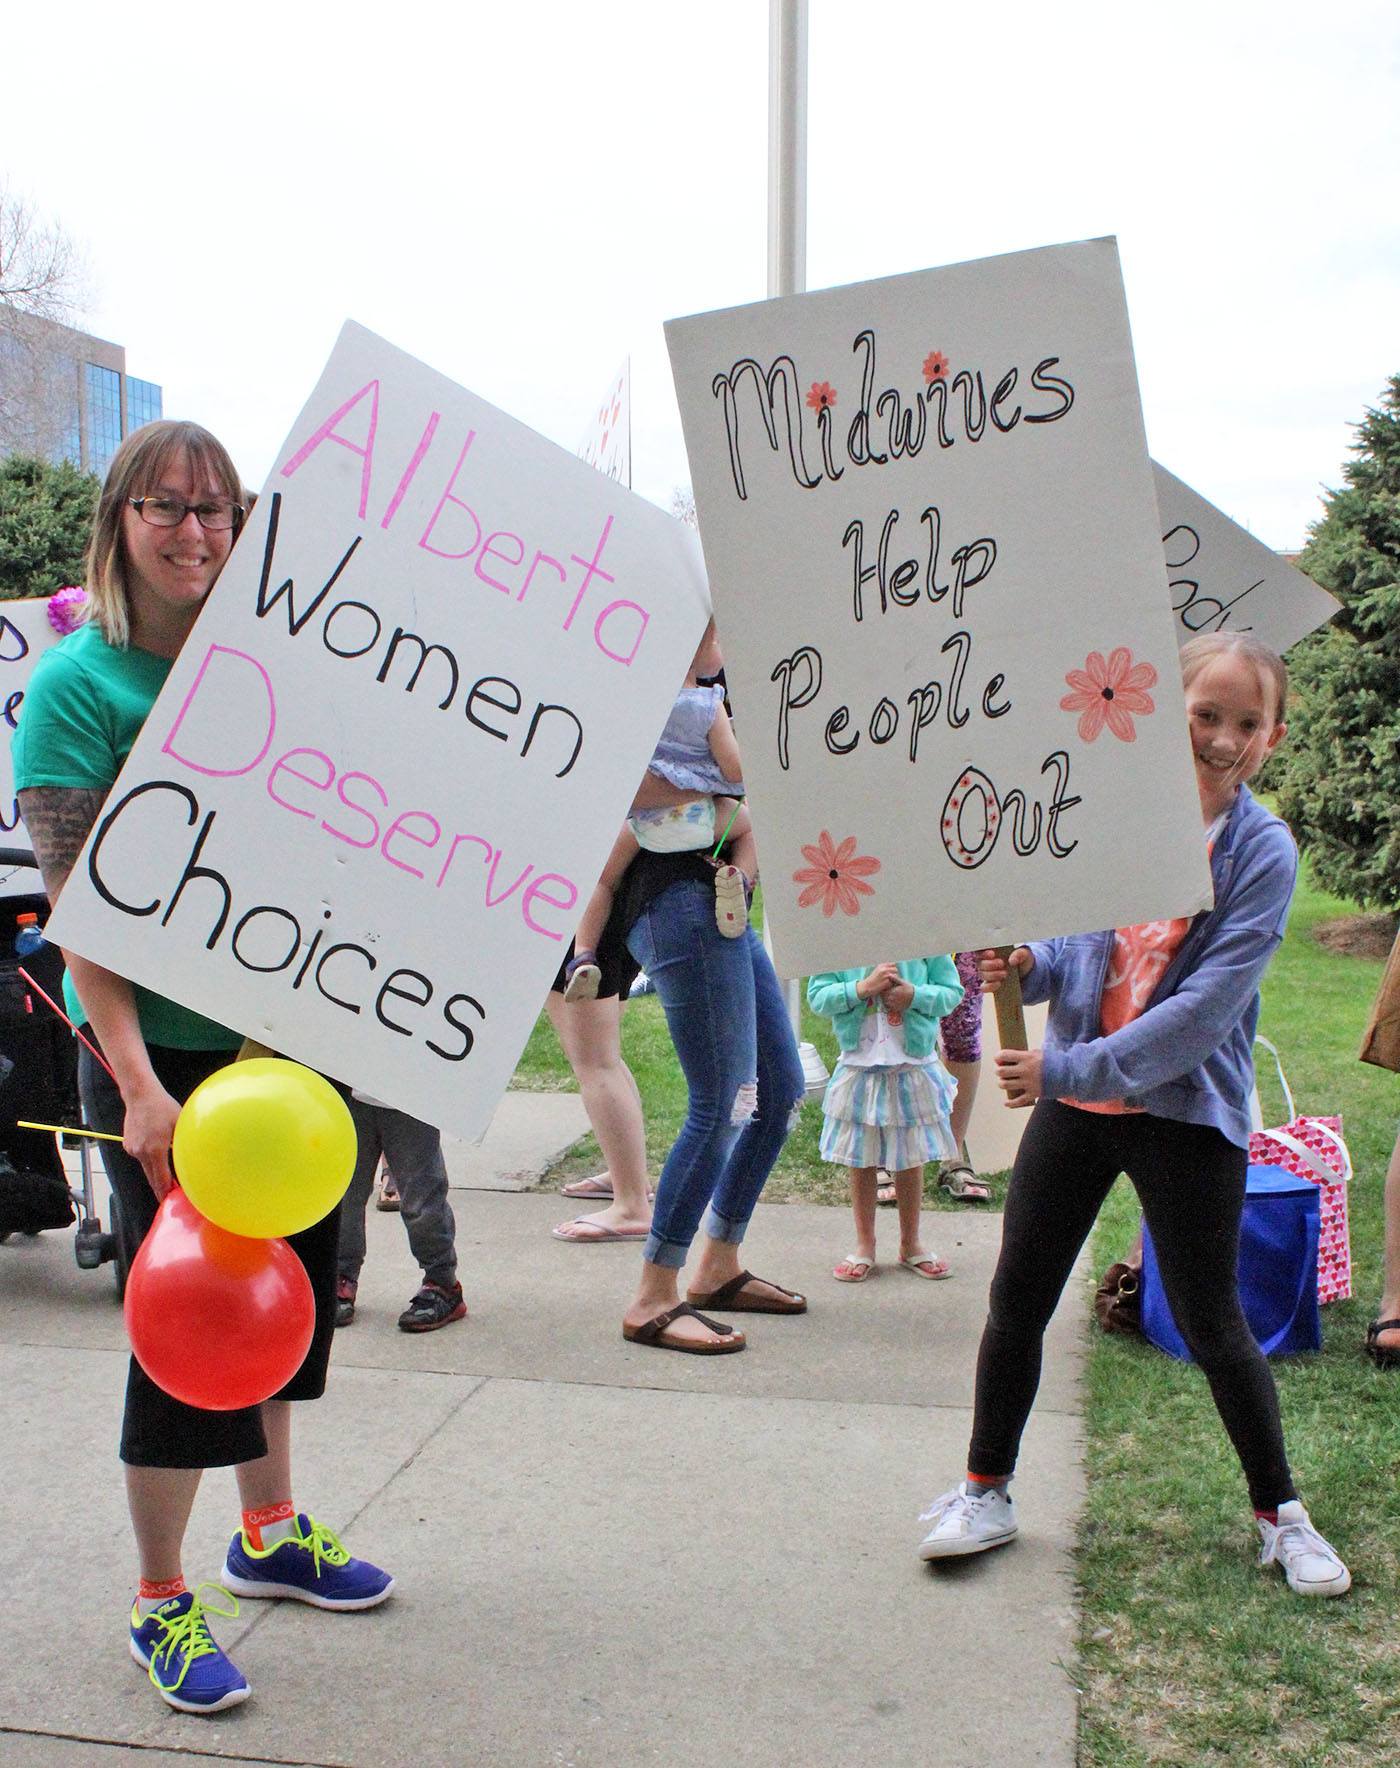 SUPPORTING MIDWIFERY - Kristine Deschenes and Alexis Deschenes took part in today's rally for midwifery at City Hall Park.